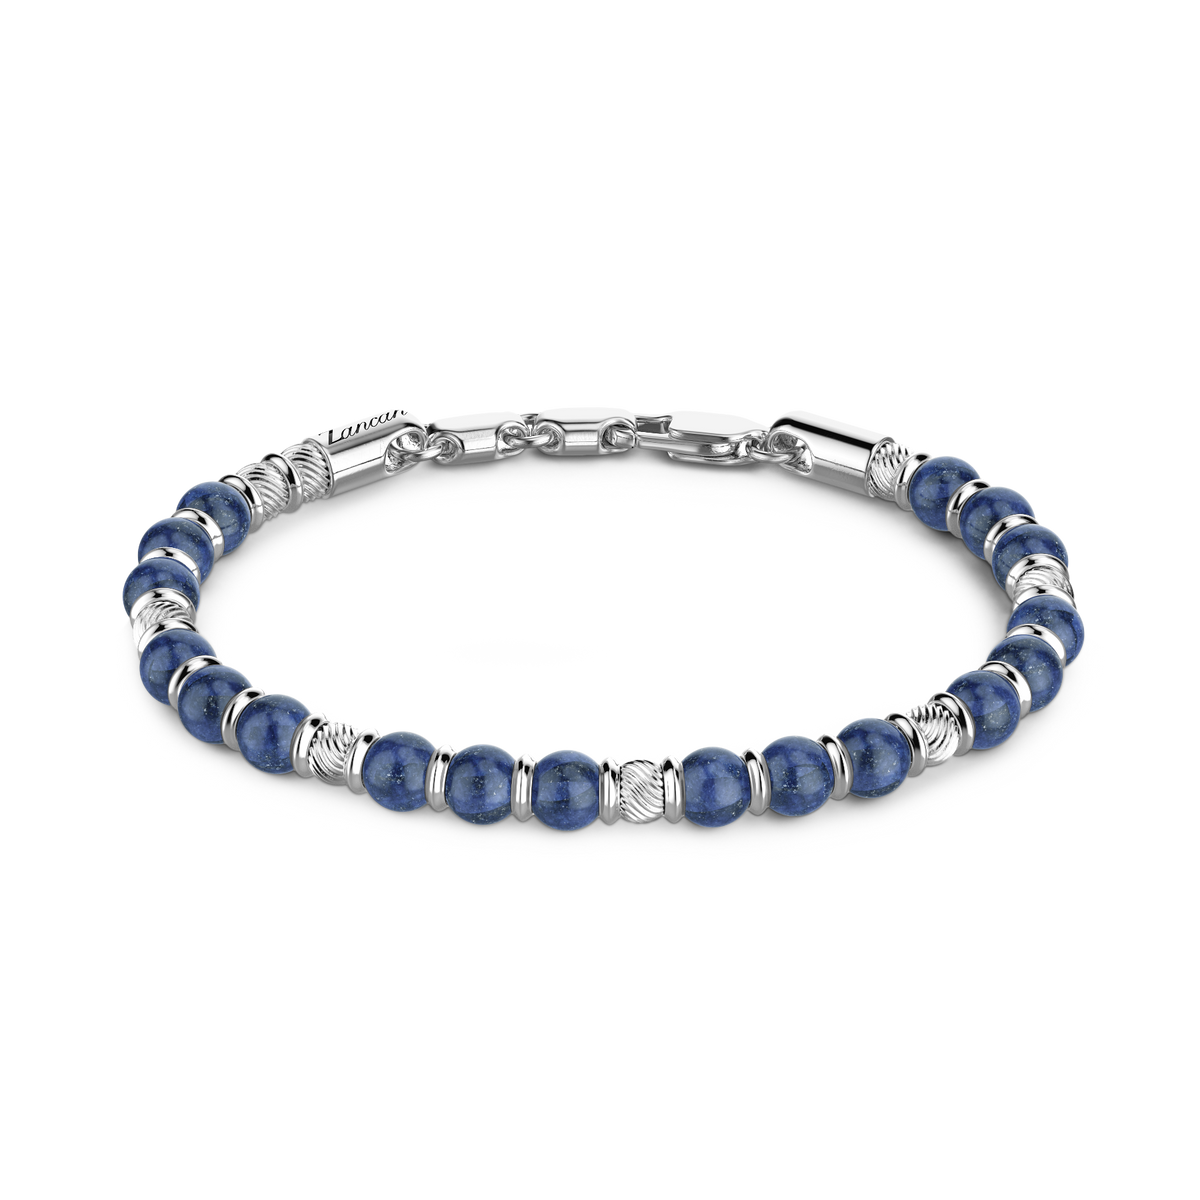 Soft Silver Bracelet with Beads & Hard Natural Stones